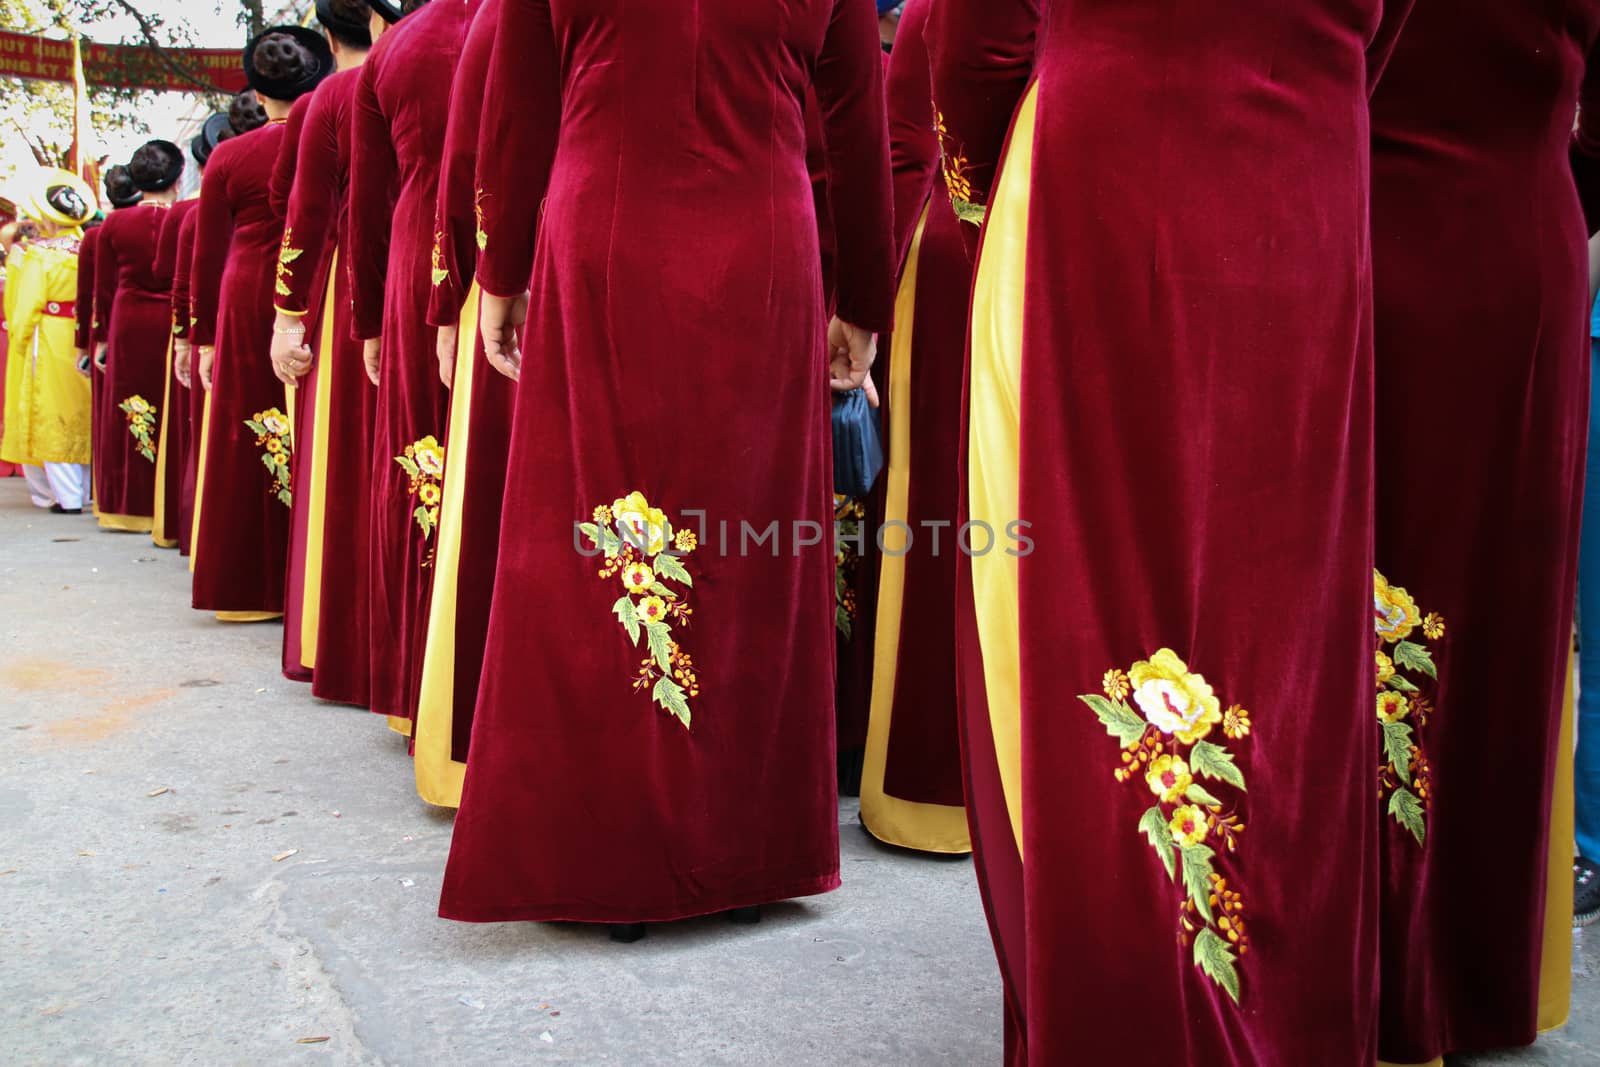 Women called Hoi dong tue wearing festival clothes during a parade for Hoi Phao Dong Ky or Dong Ky Firecracker Festival in Bac Ninh, Vietnam